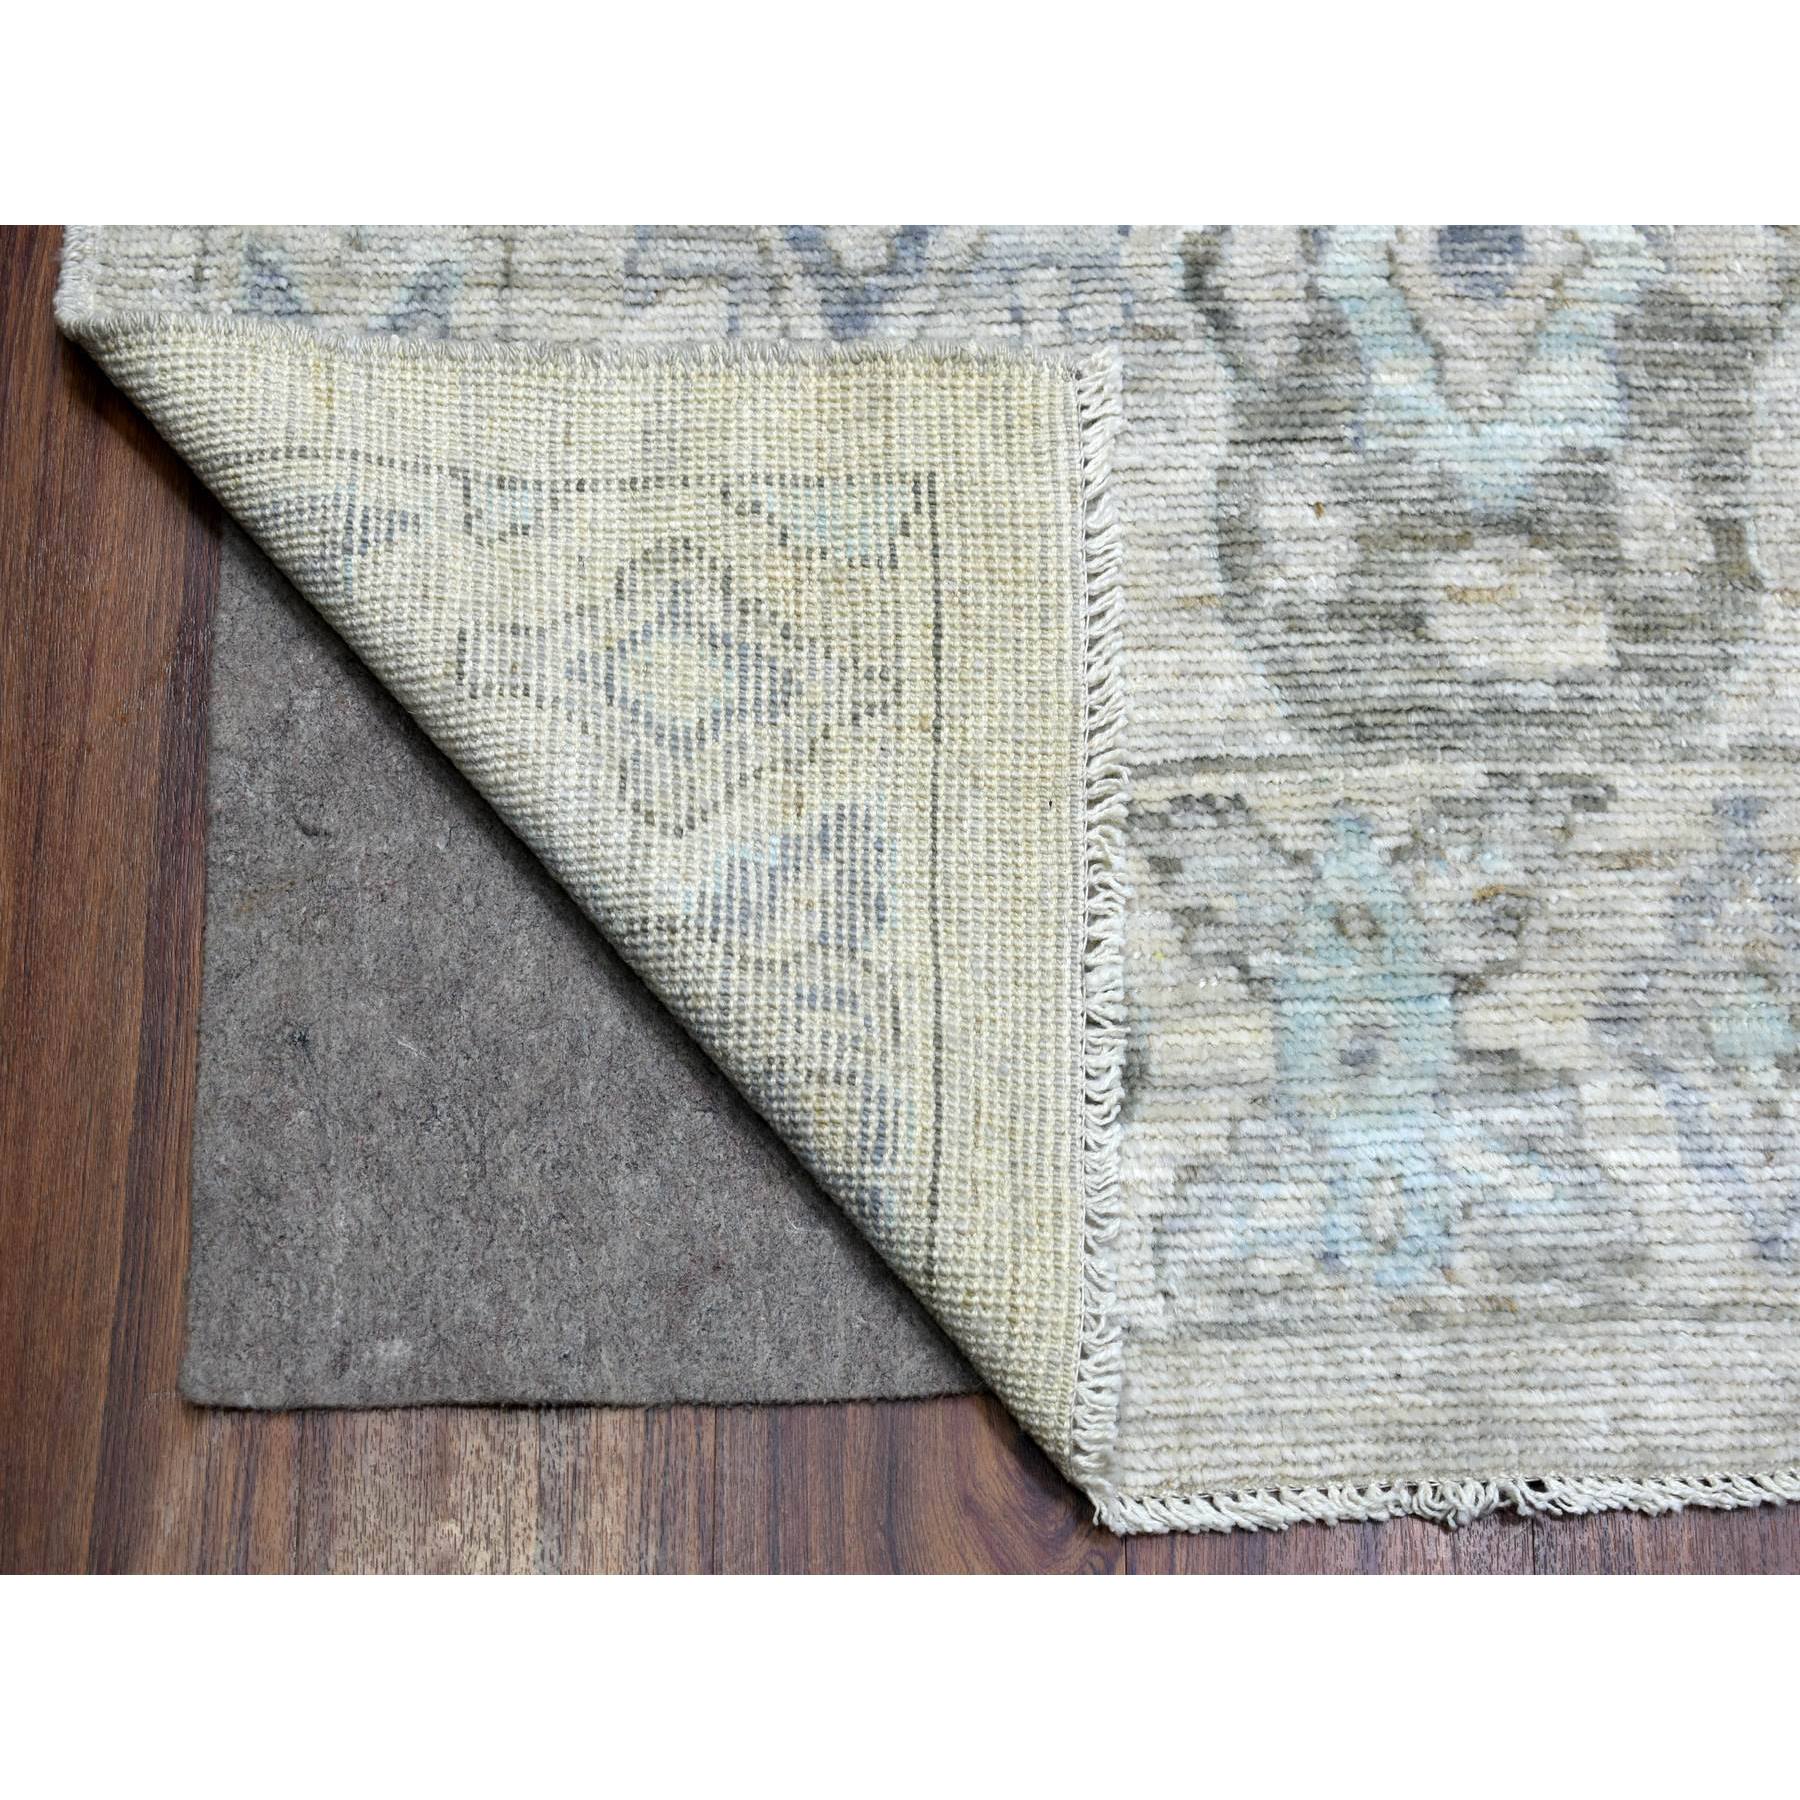 9'x12'8" Soft and Pliable Wool Hand Woven Gray Afghan Angora Ushak with Large Elements Design Oriental Rug 